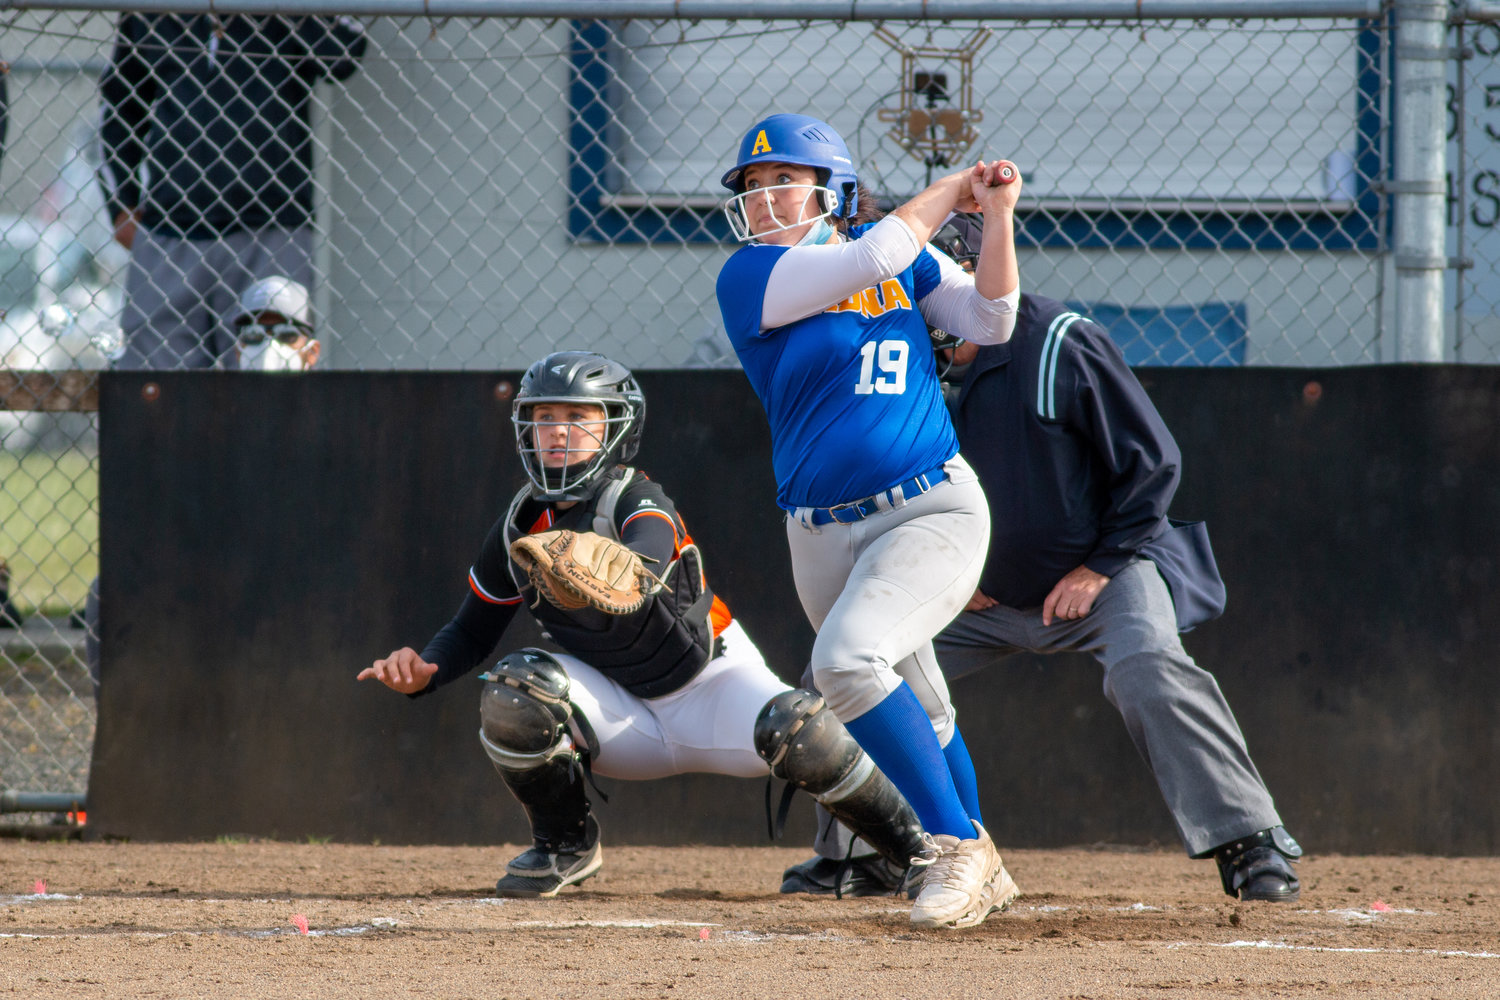 Adna's Kaylee Ashley connects on a Rainier pitch on Tuesday.